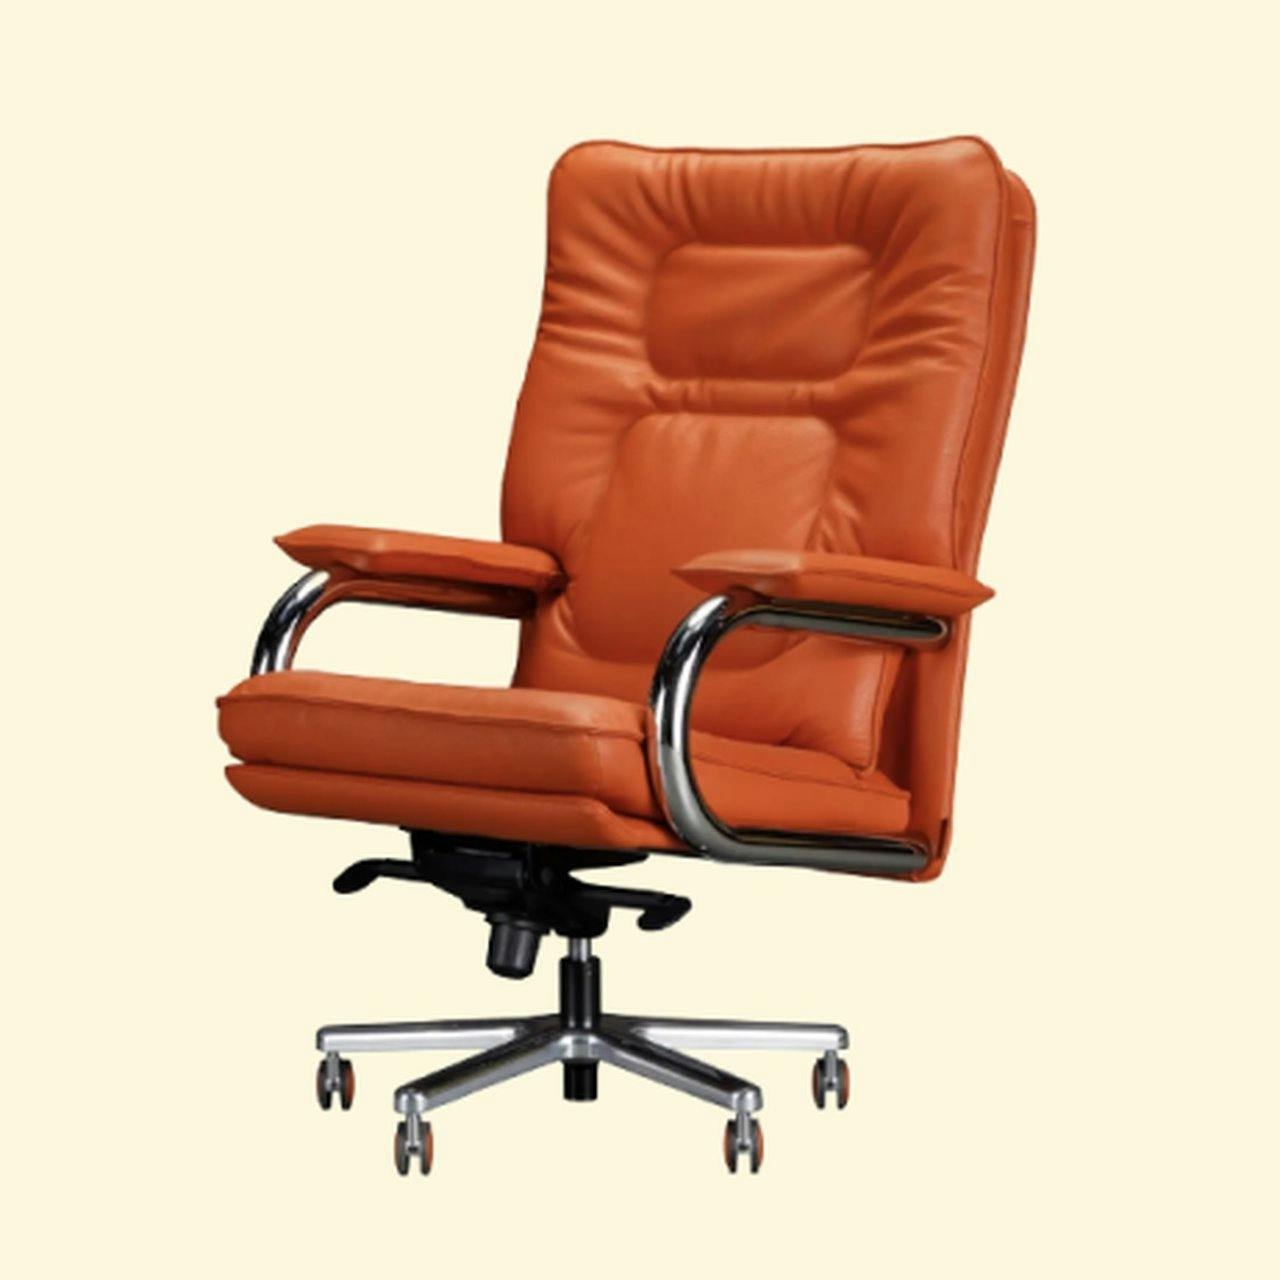 Walter Knoll Office chairs